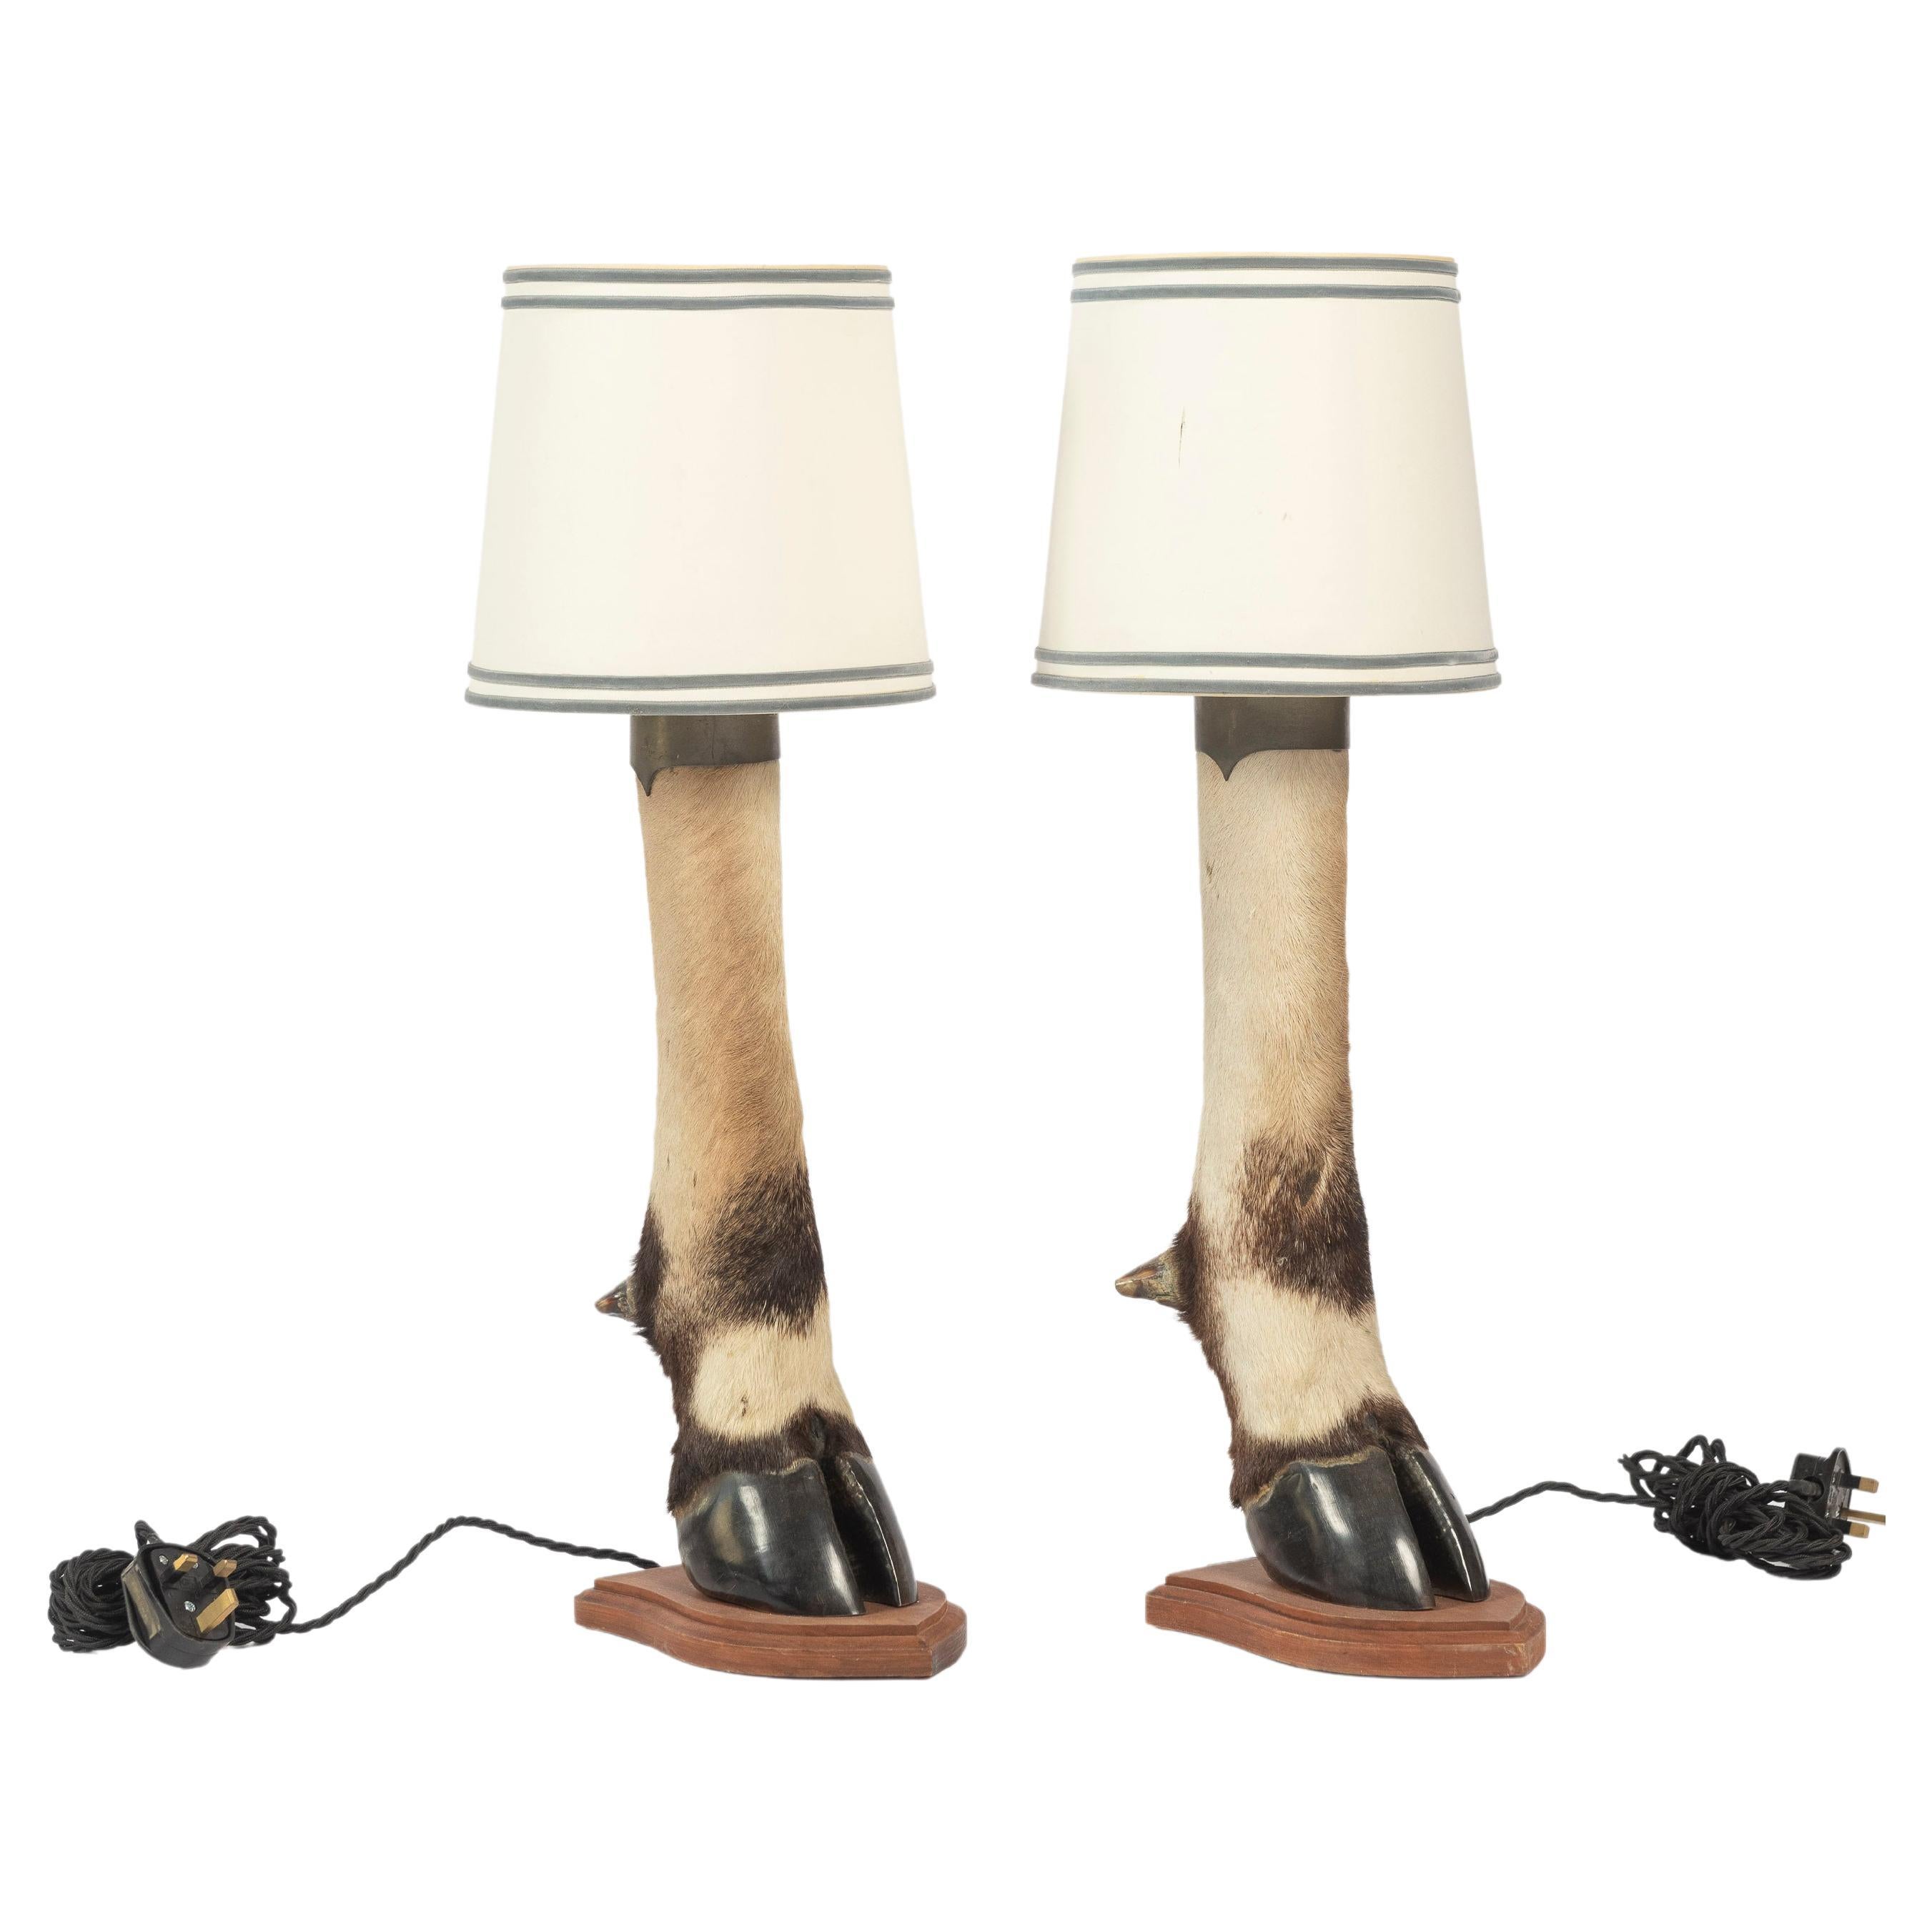 Two French Bovine Hoof Table Lamps with Shades For Sale